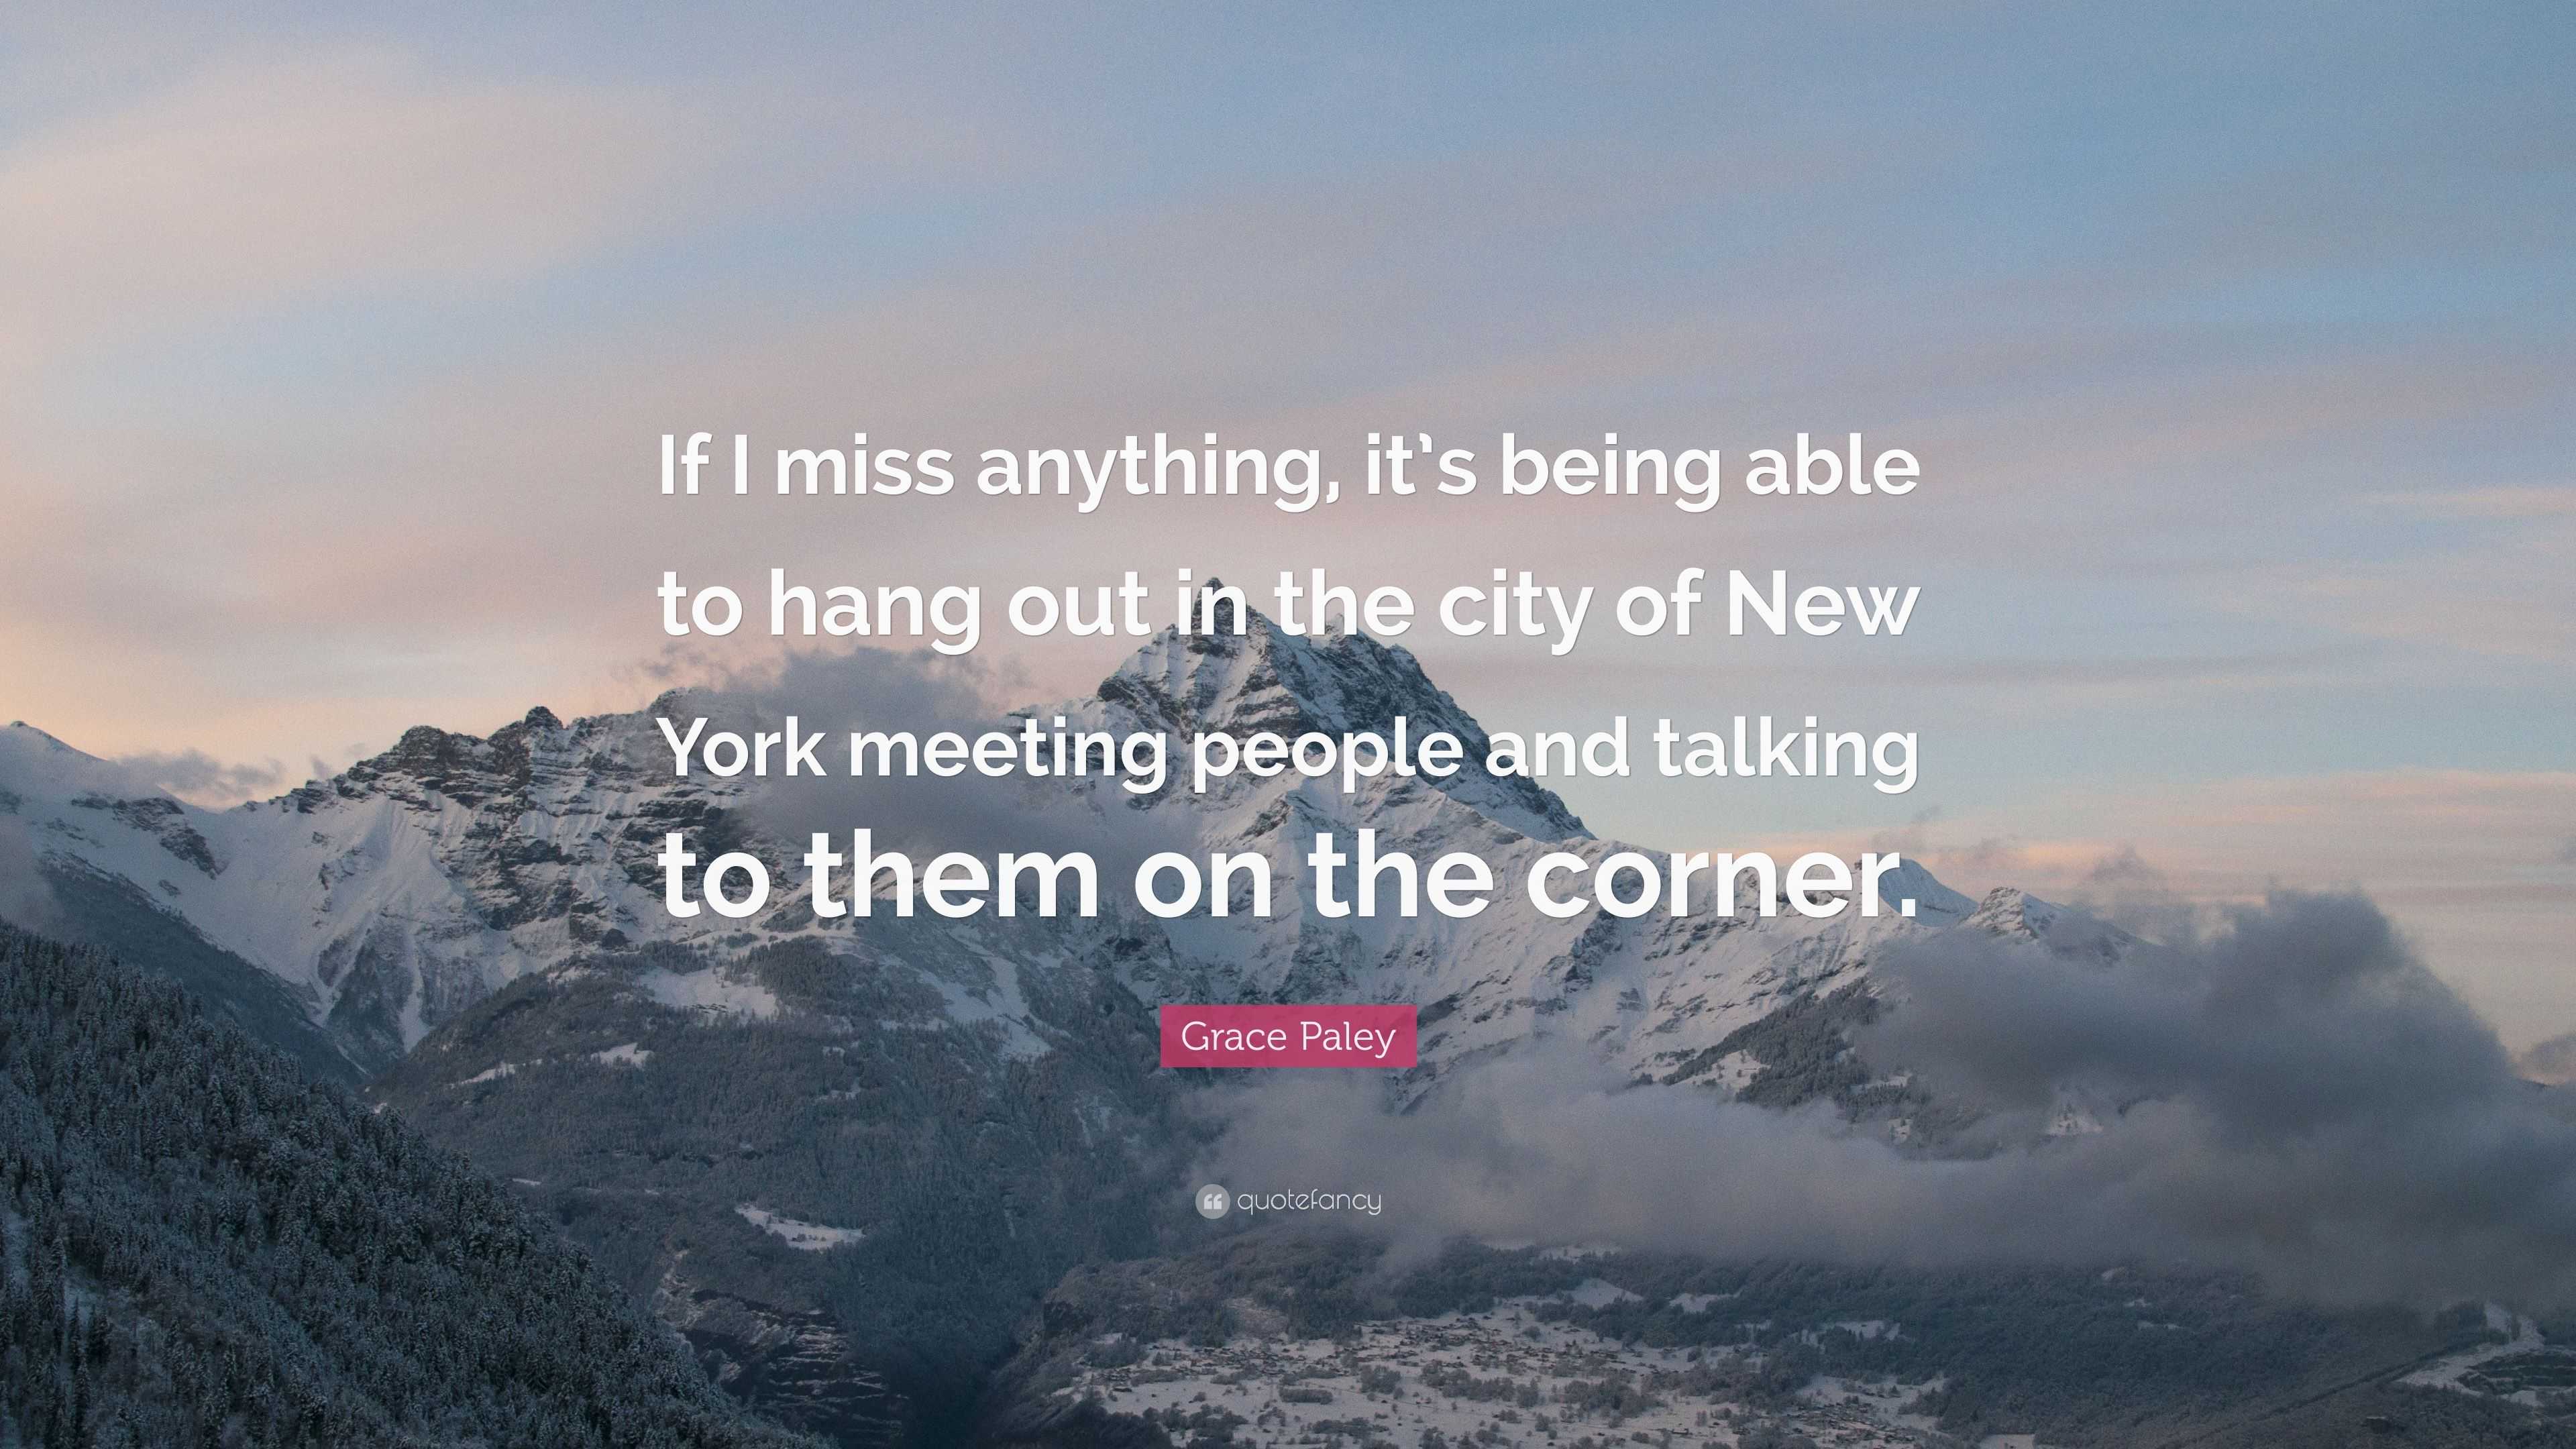 Grace Paley Quote If I Miss Anything It S Being Able To Hang Out In The City Of New York Meeting People And Talking To Them On The Corner